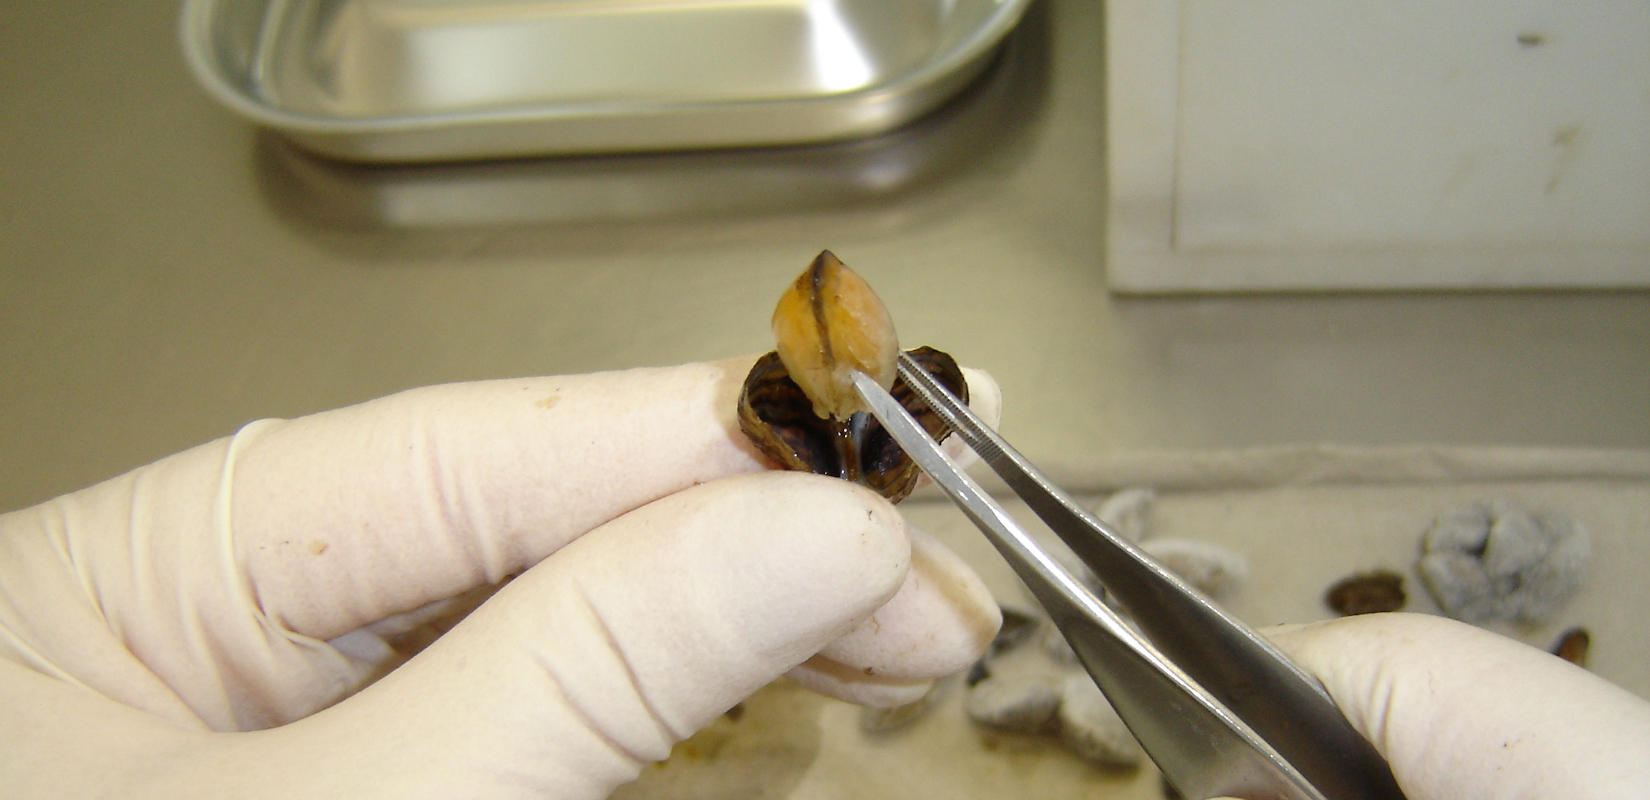 The soft body of a zebra mussel is extracted